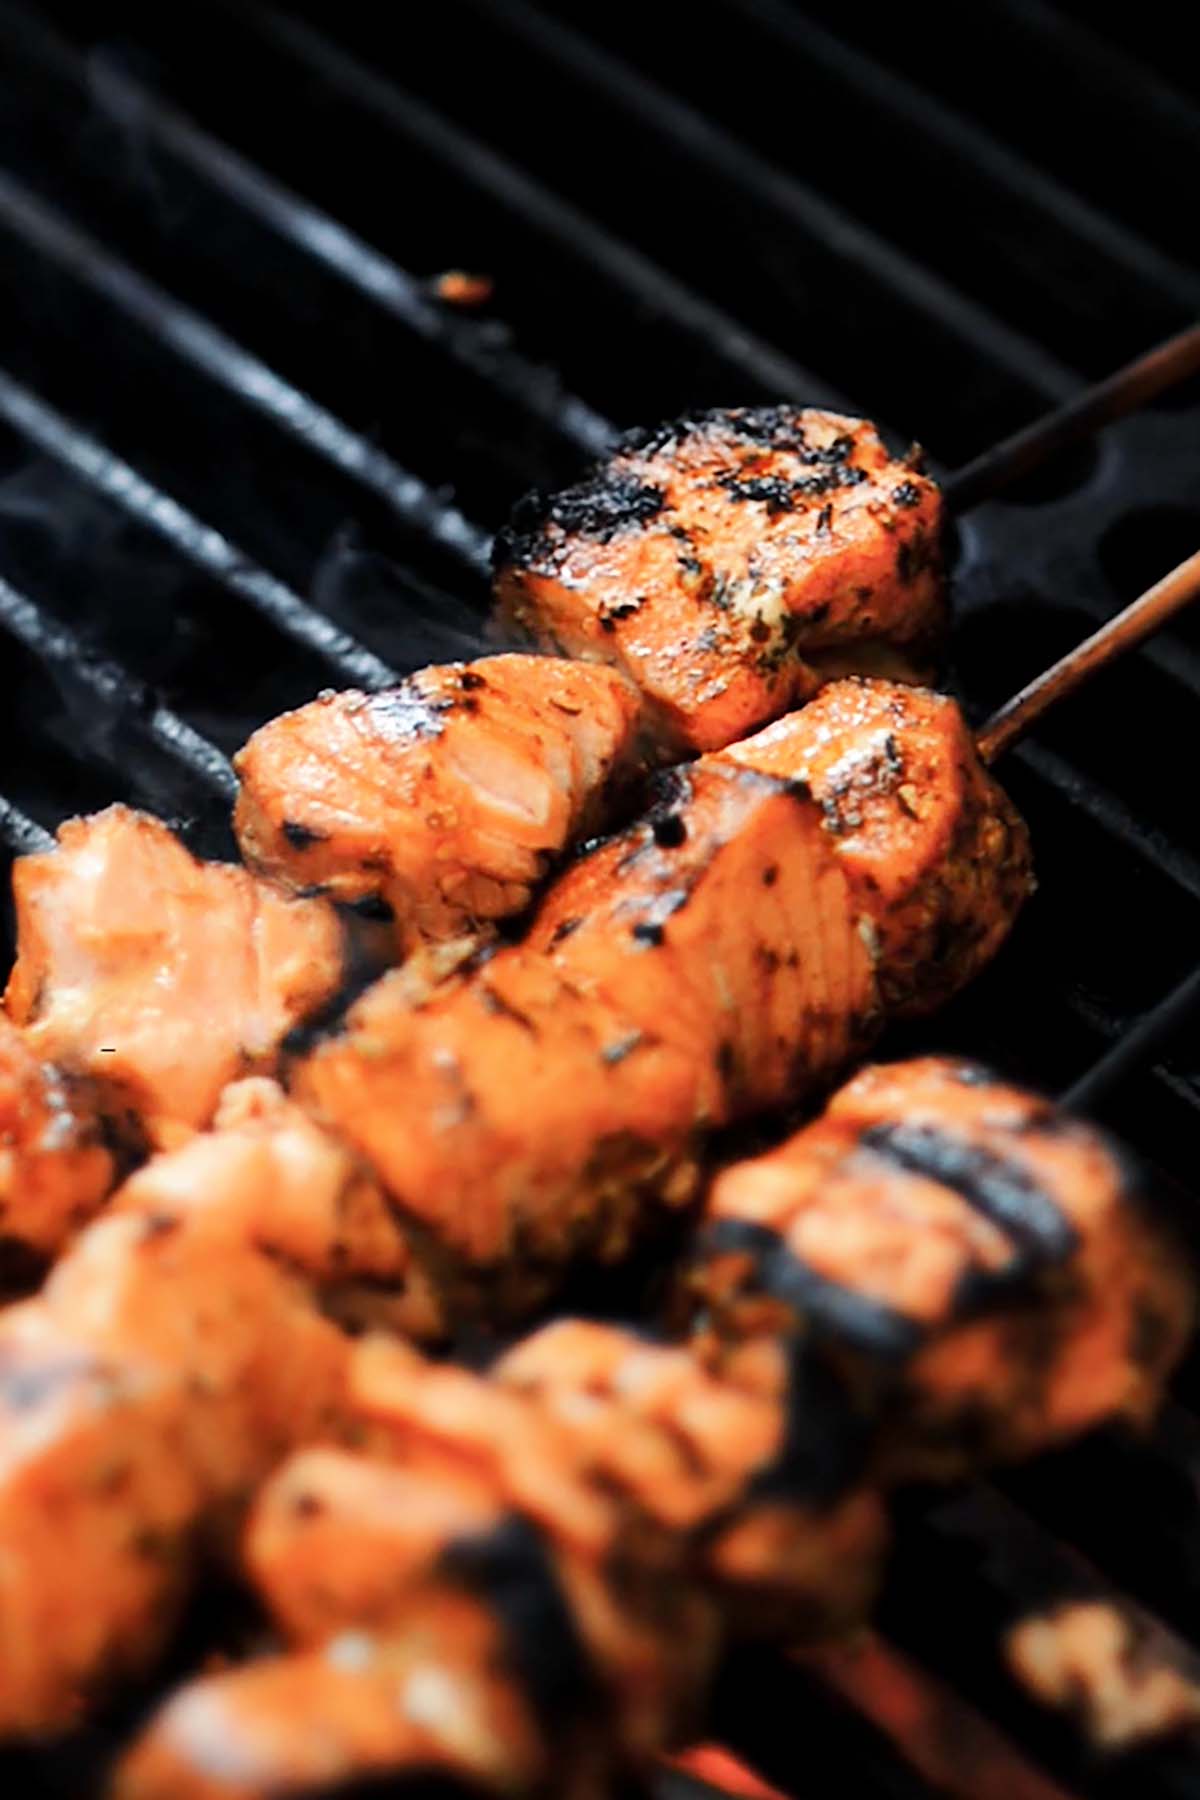 Salmon skewers being grilled over a charcoal fire.